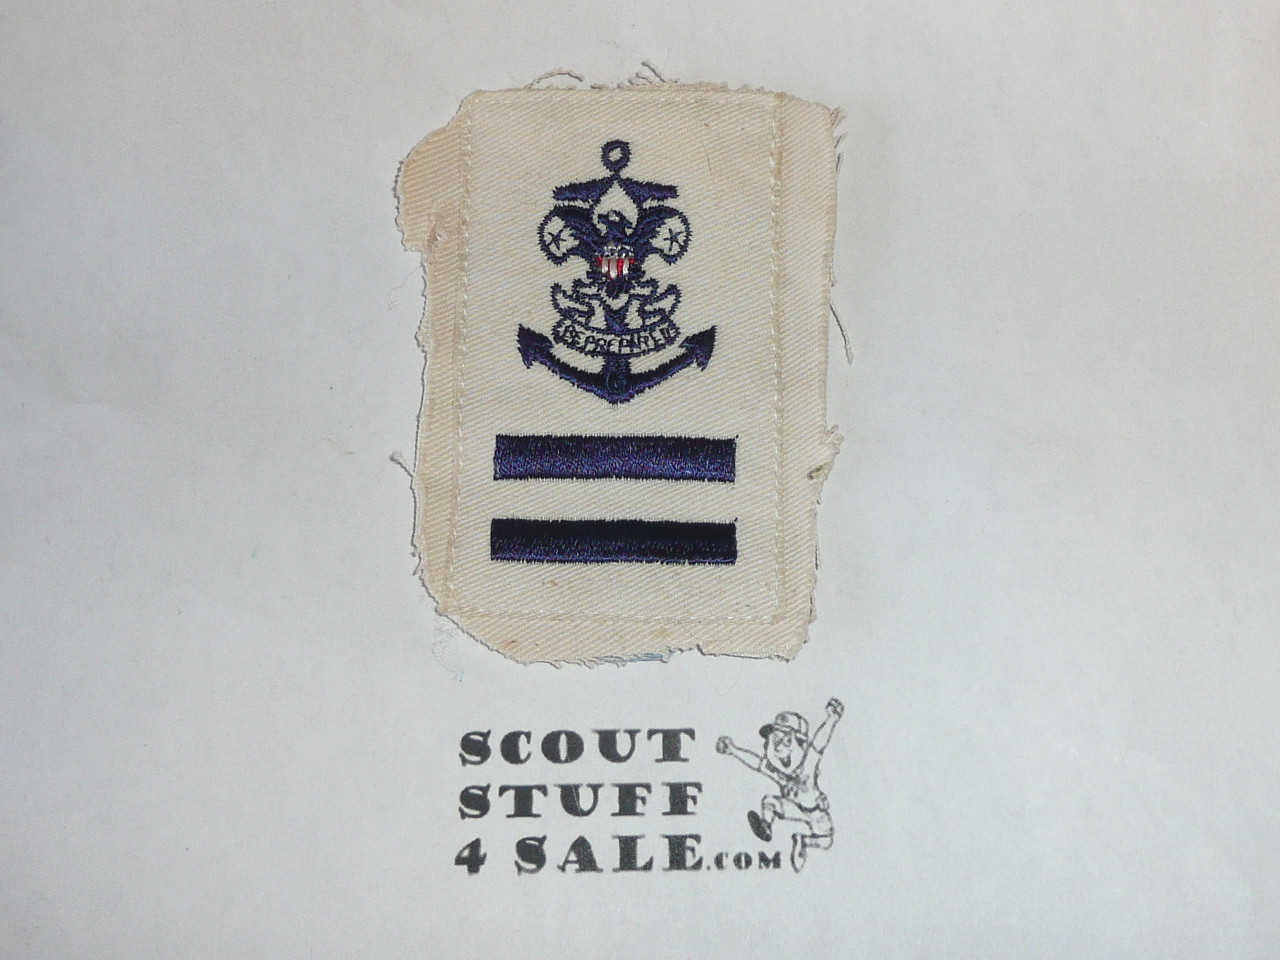 Sea Scout Rank Patch, Ordinary on White Twill, 1950's, sewn to pocket